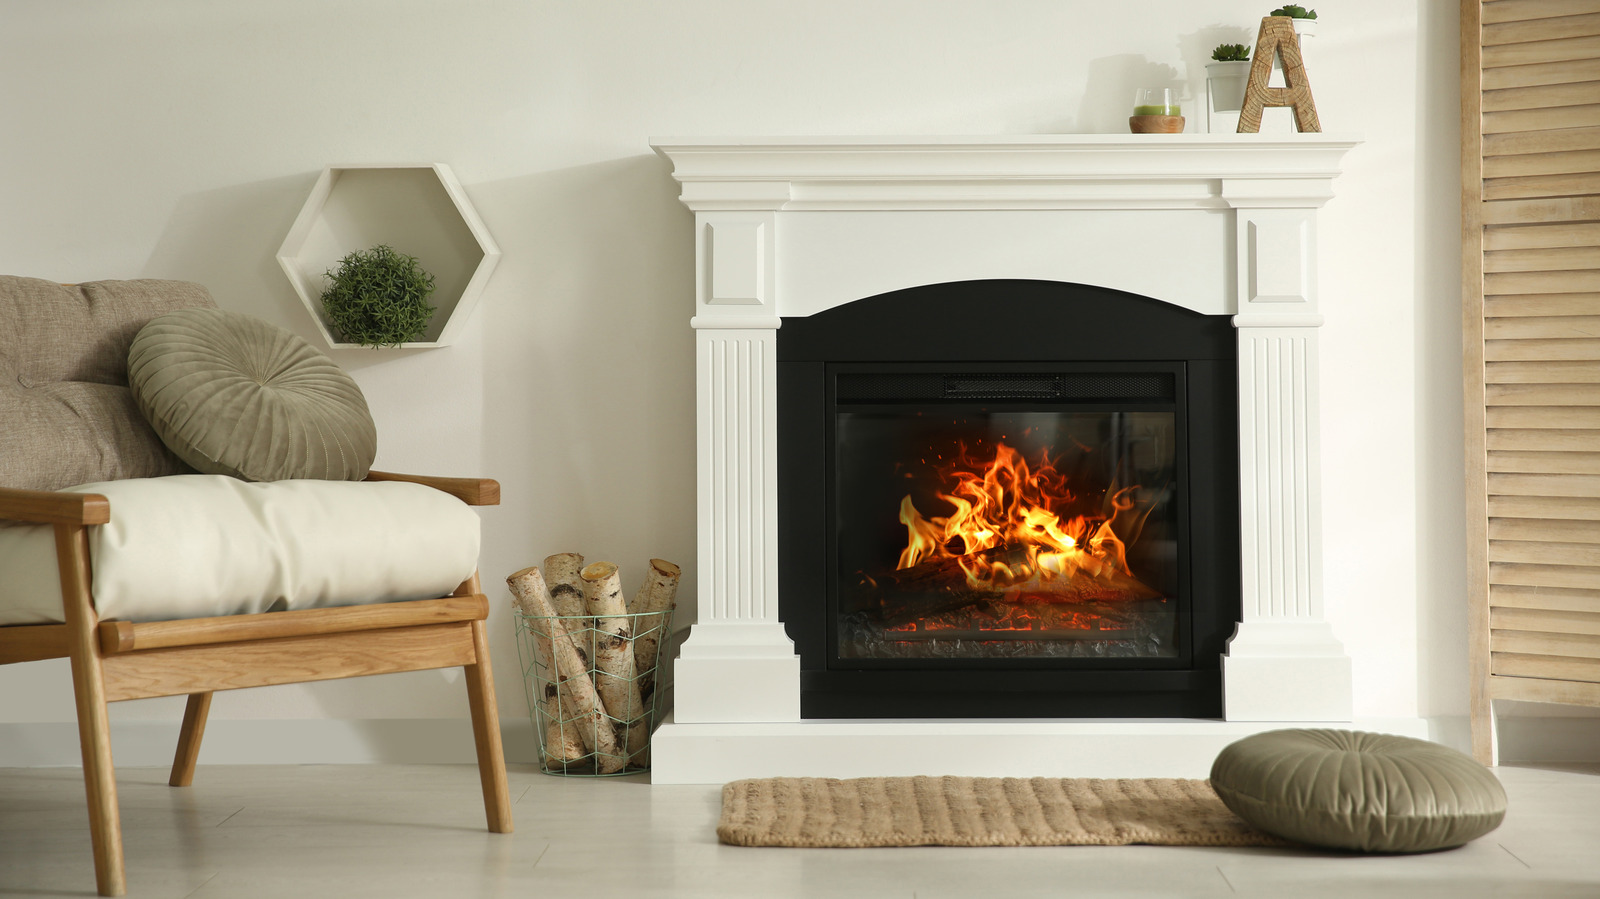 How to Make Gel Fuel for Your Ventless Fireplace: A DIY Guide